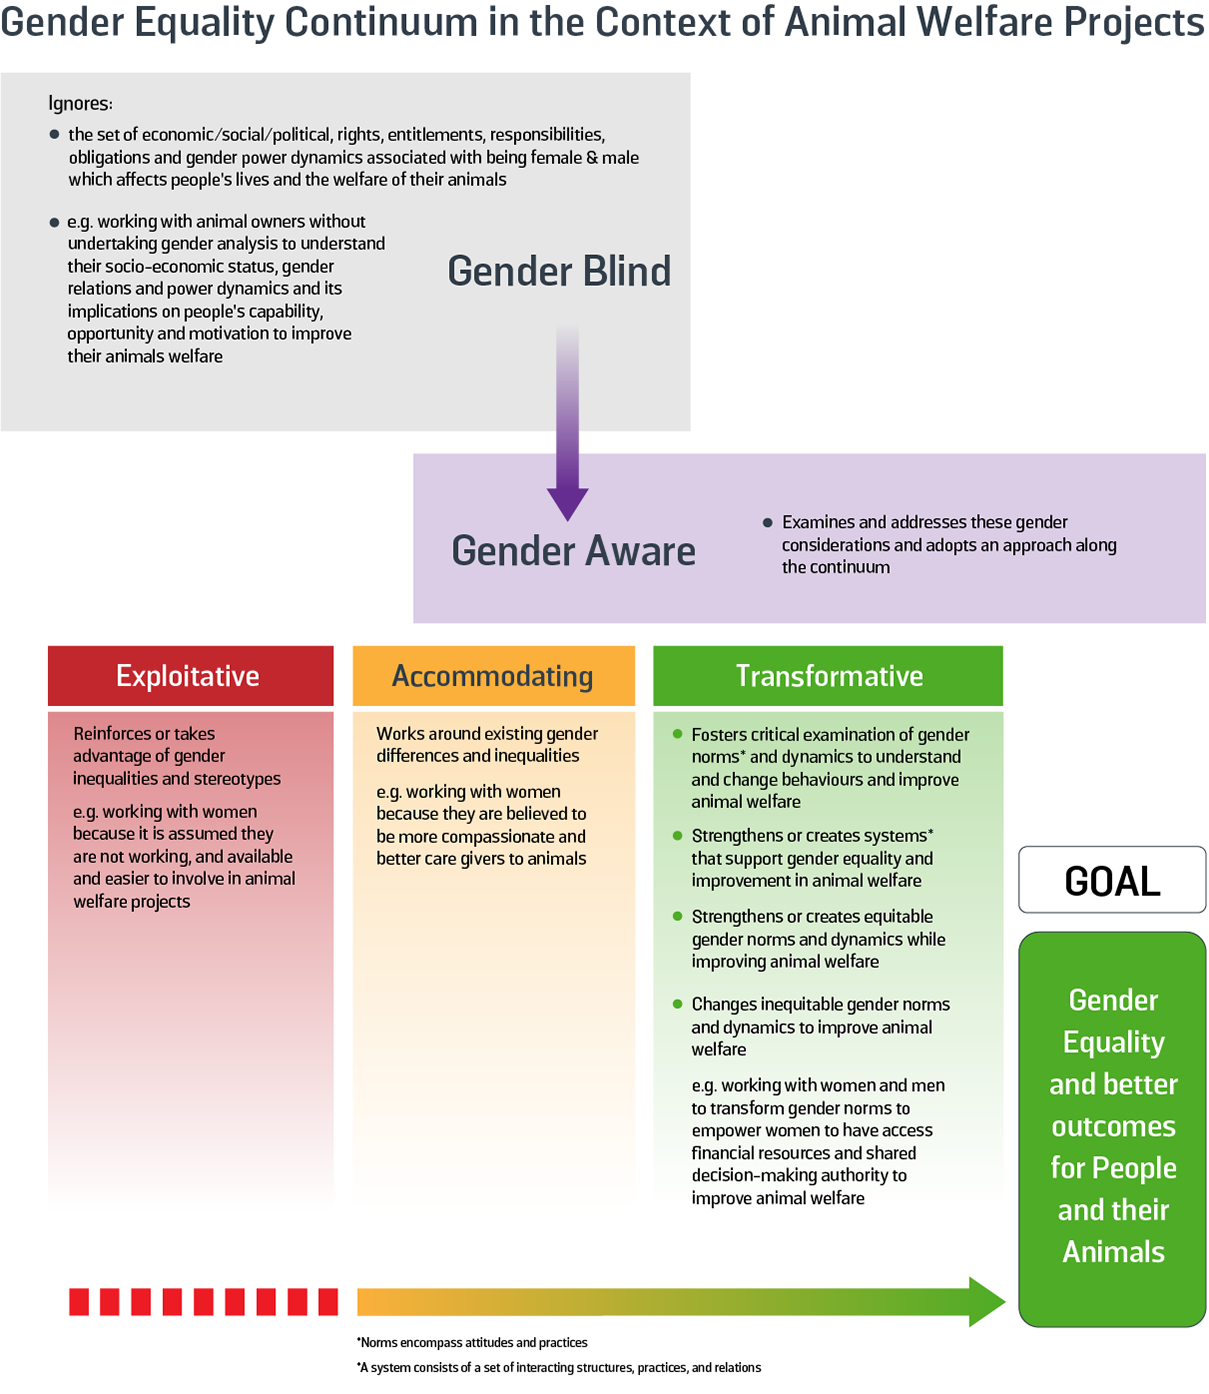 Figure 28: Gender Equality Continuum with Examples from Animal Welfare Improvement Projects [56]